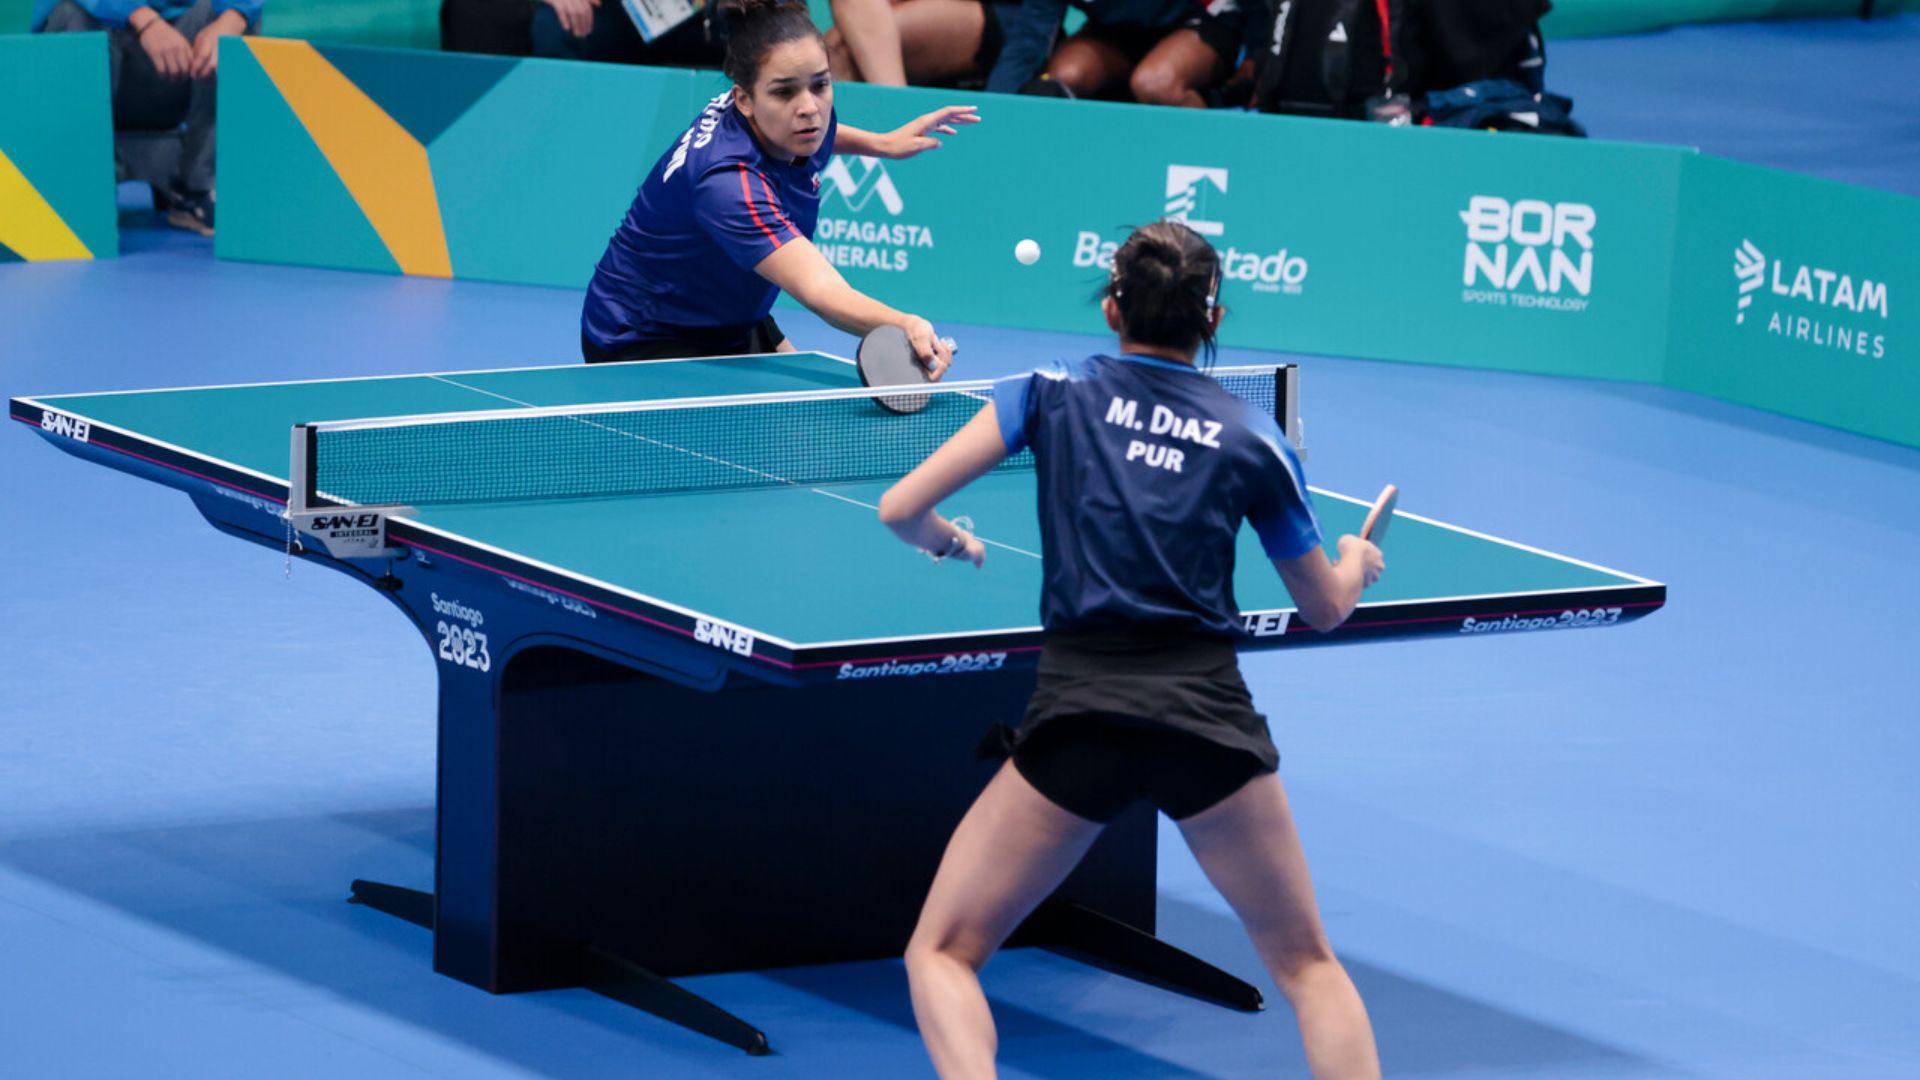 Table Tennis: A competitive day in team matches